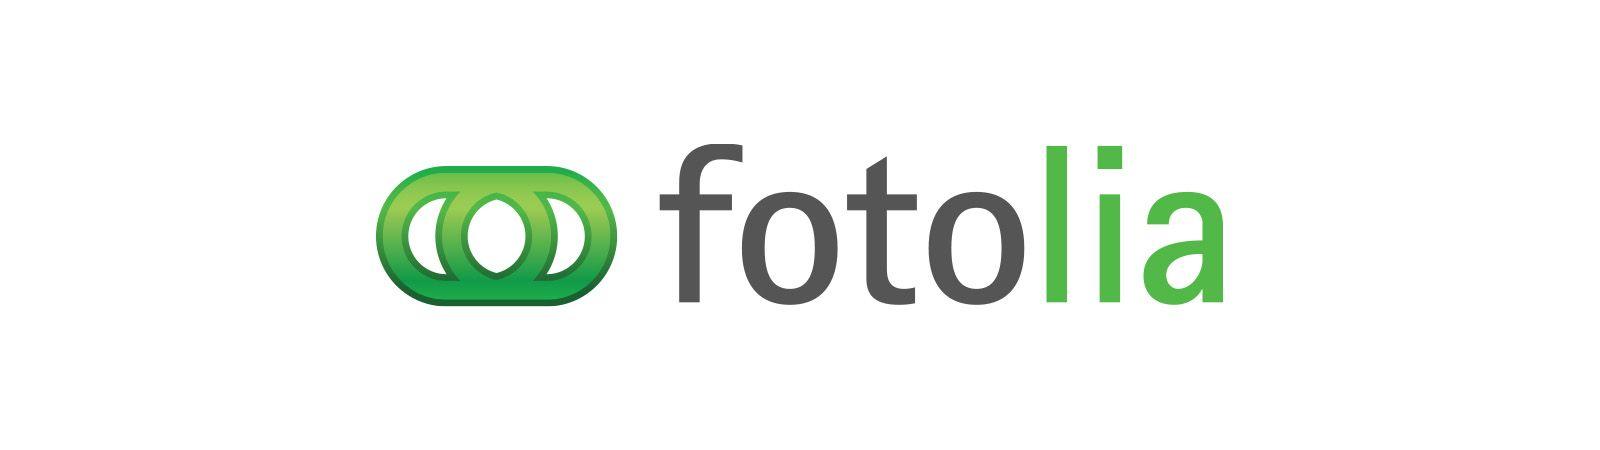 Fotolia Logo - Fotolia | Technology Sector | TA | A Private Equity Firm